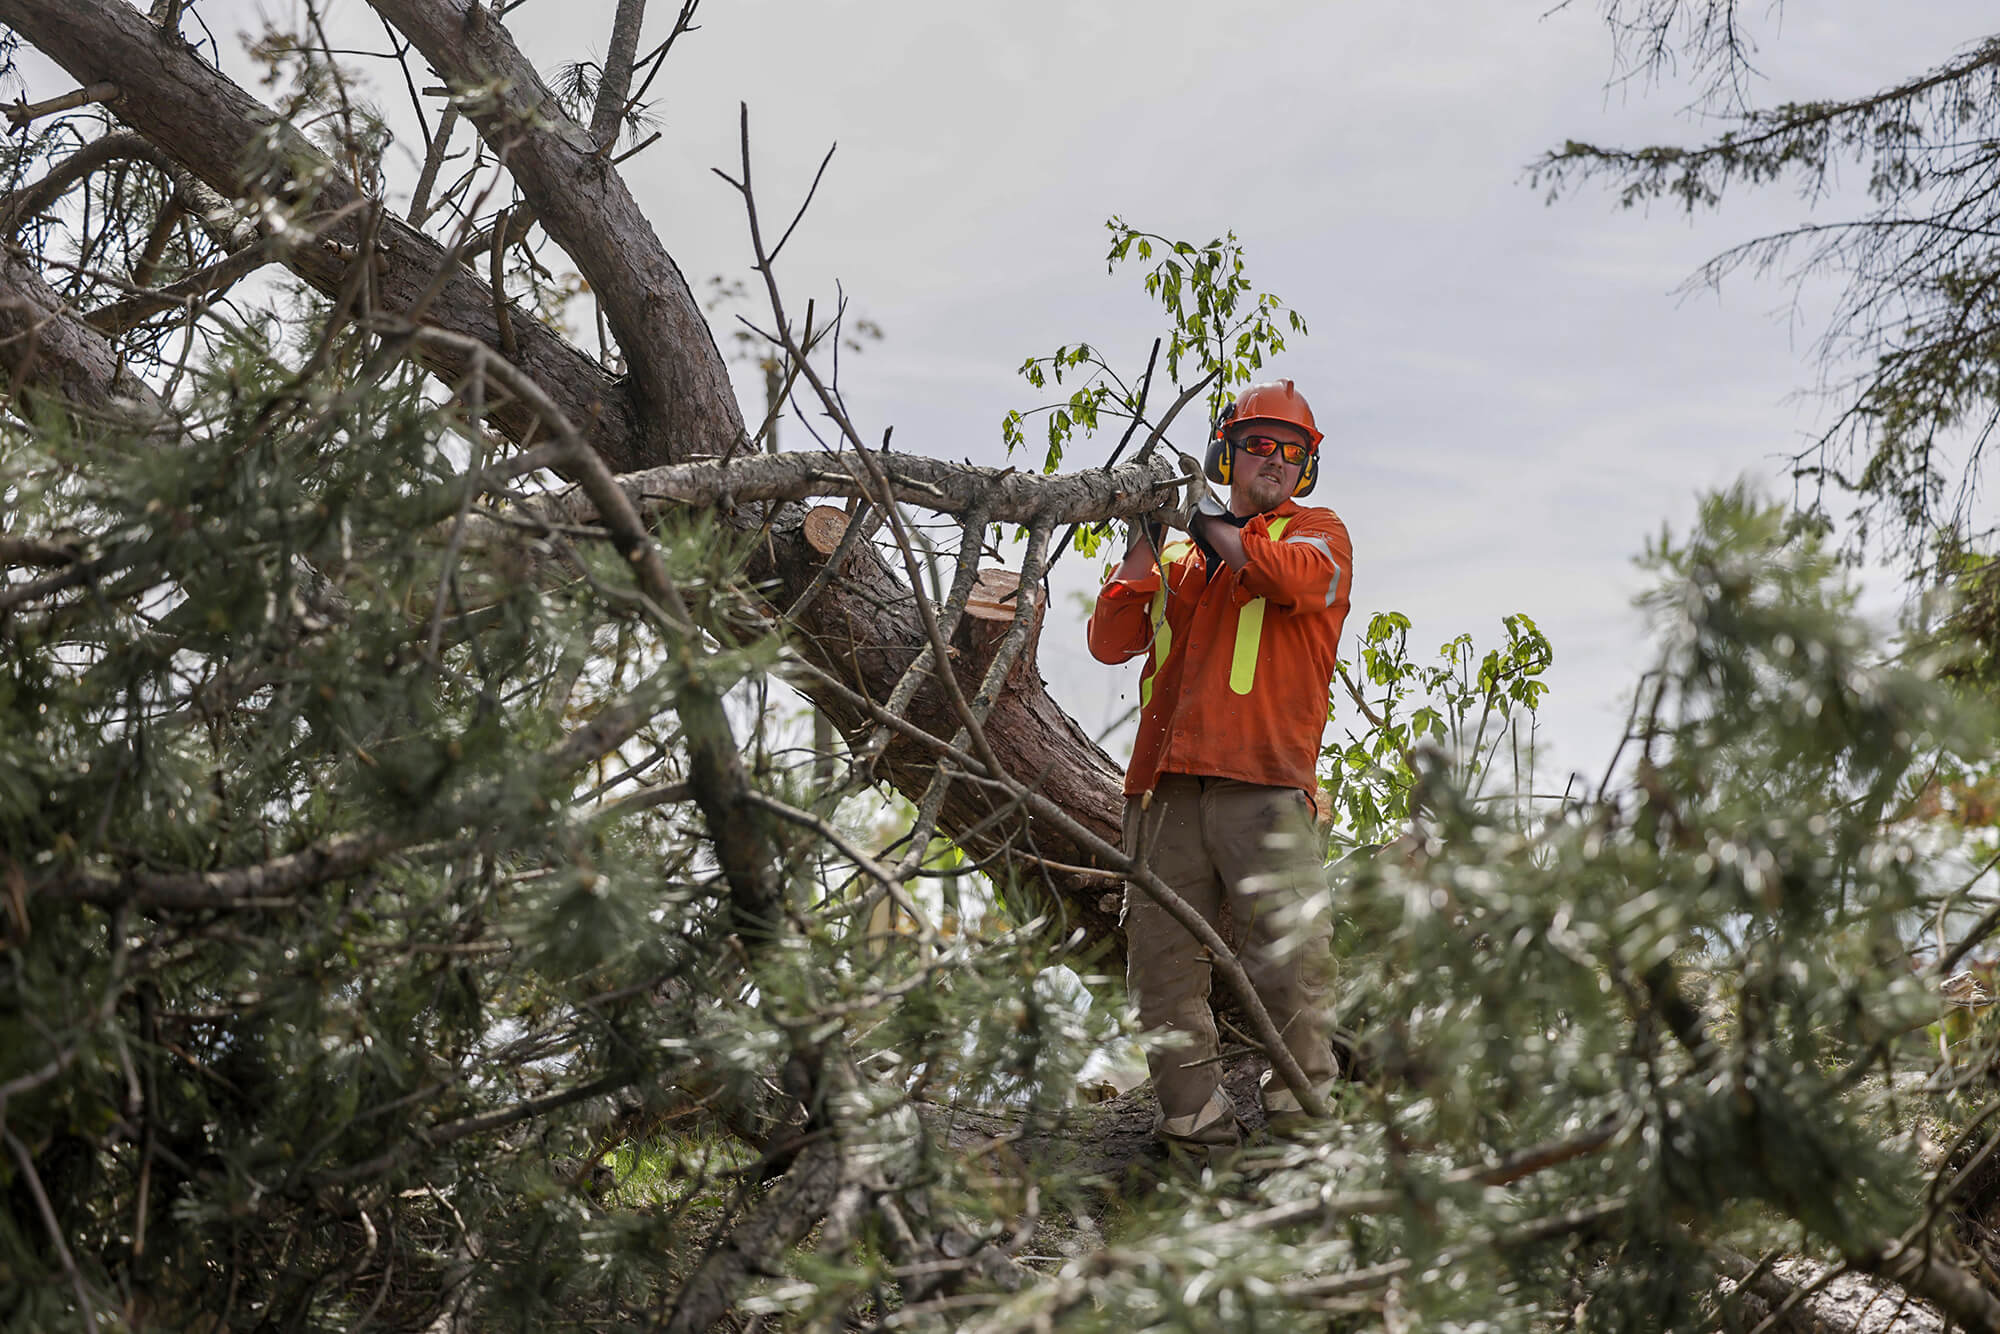 Image of a lineman sawing tree branches.